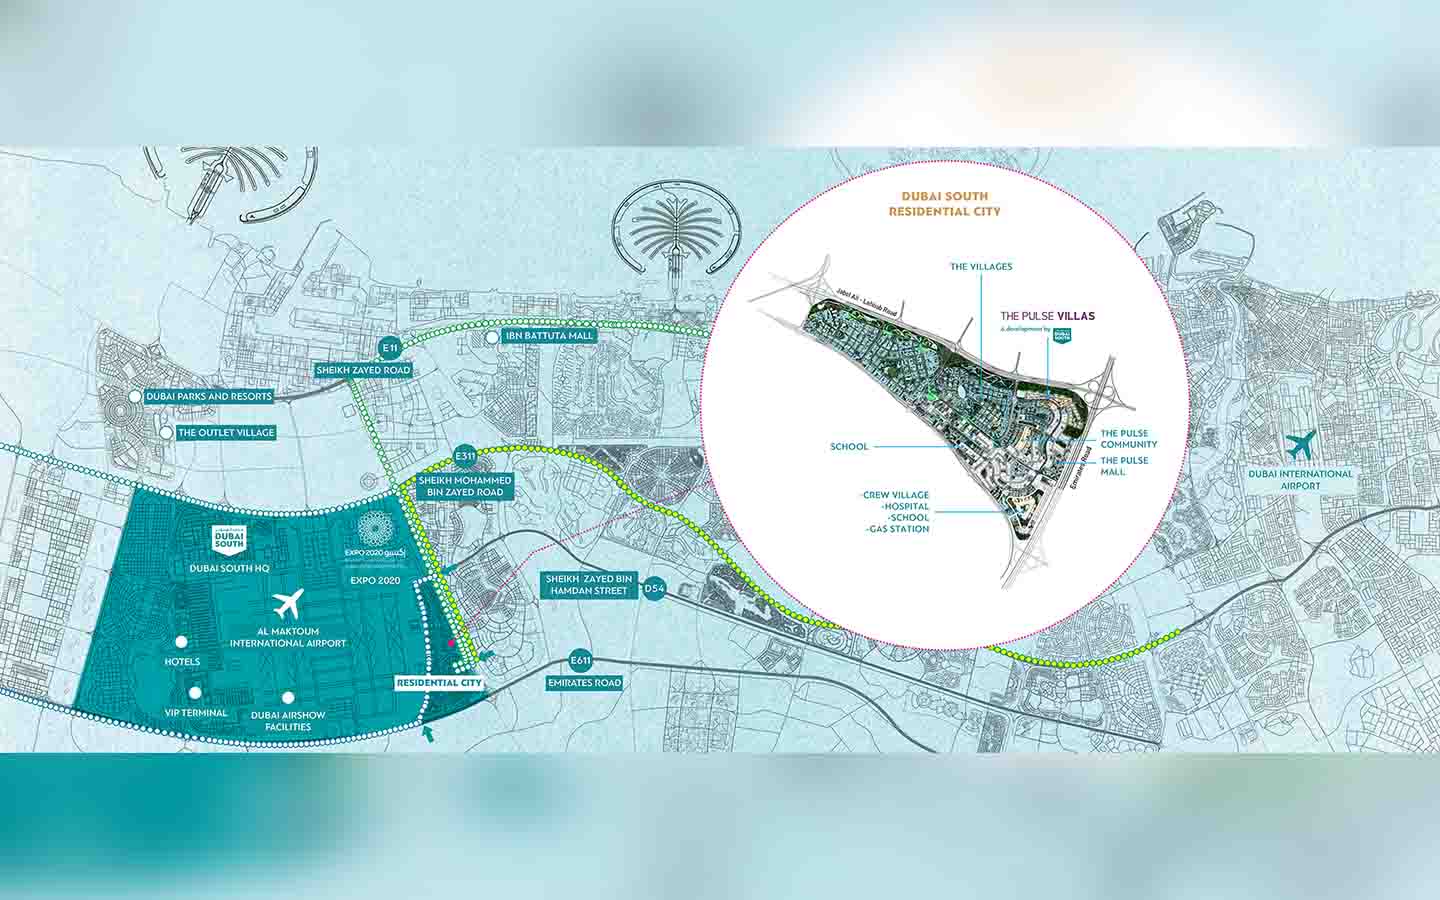 Dubai South is a visionary master-planned city